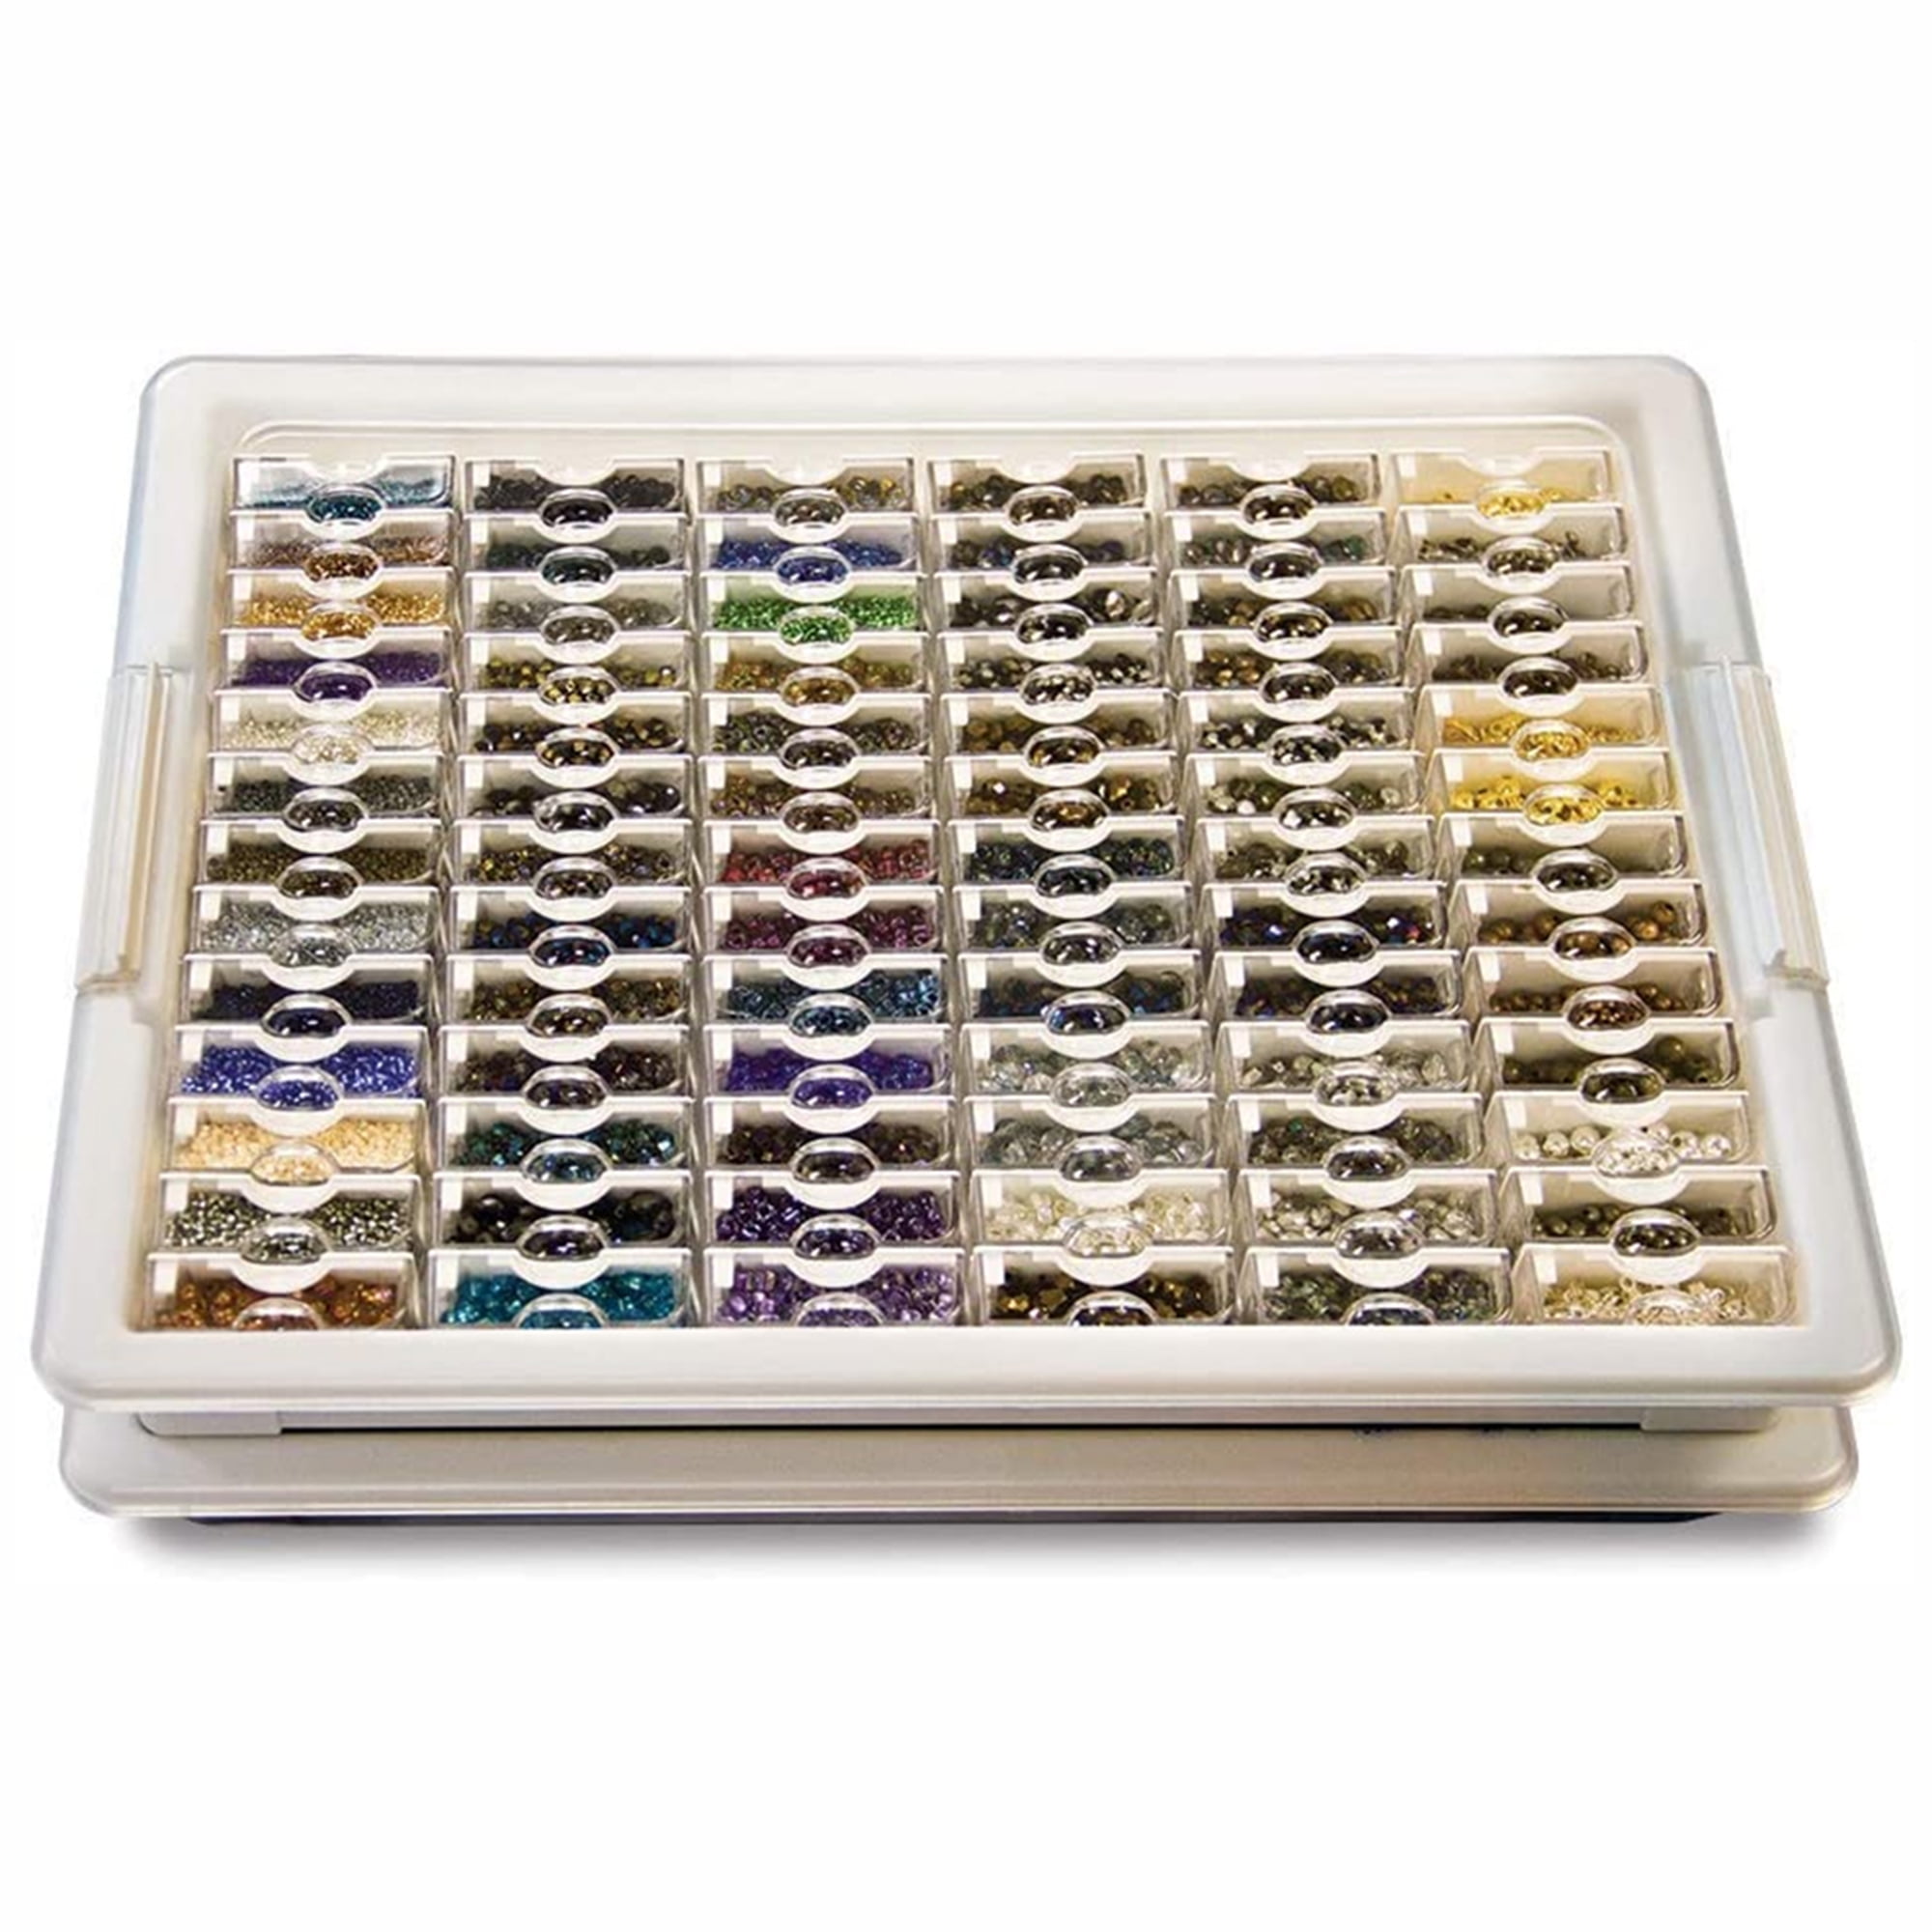 Rebrilliant Elizabeth Ward Mixed Bead Tray With Jewelry Findings